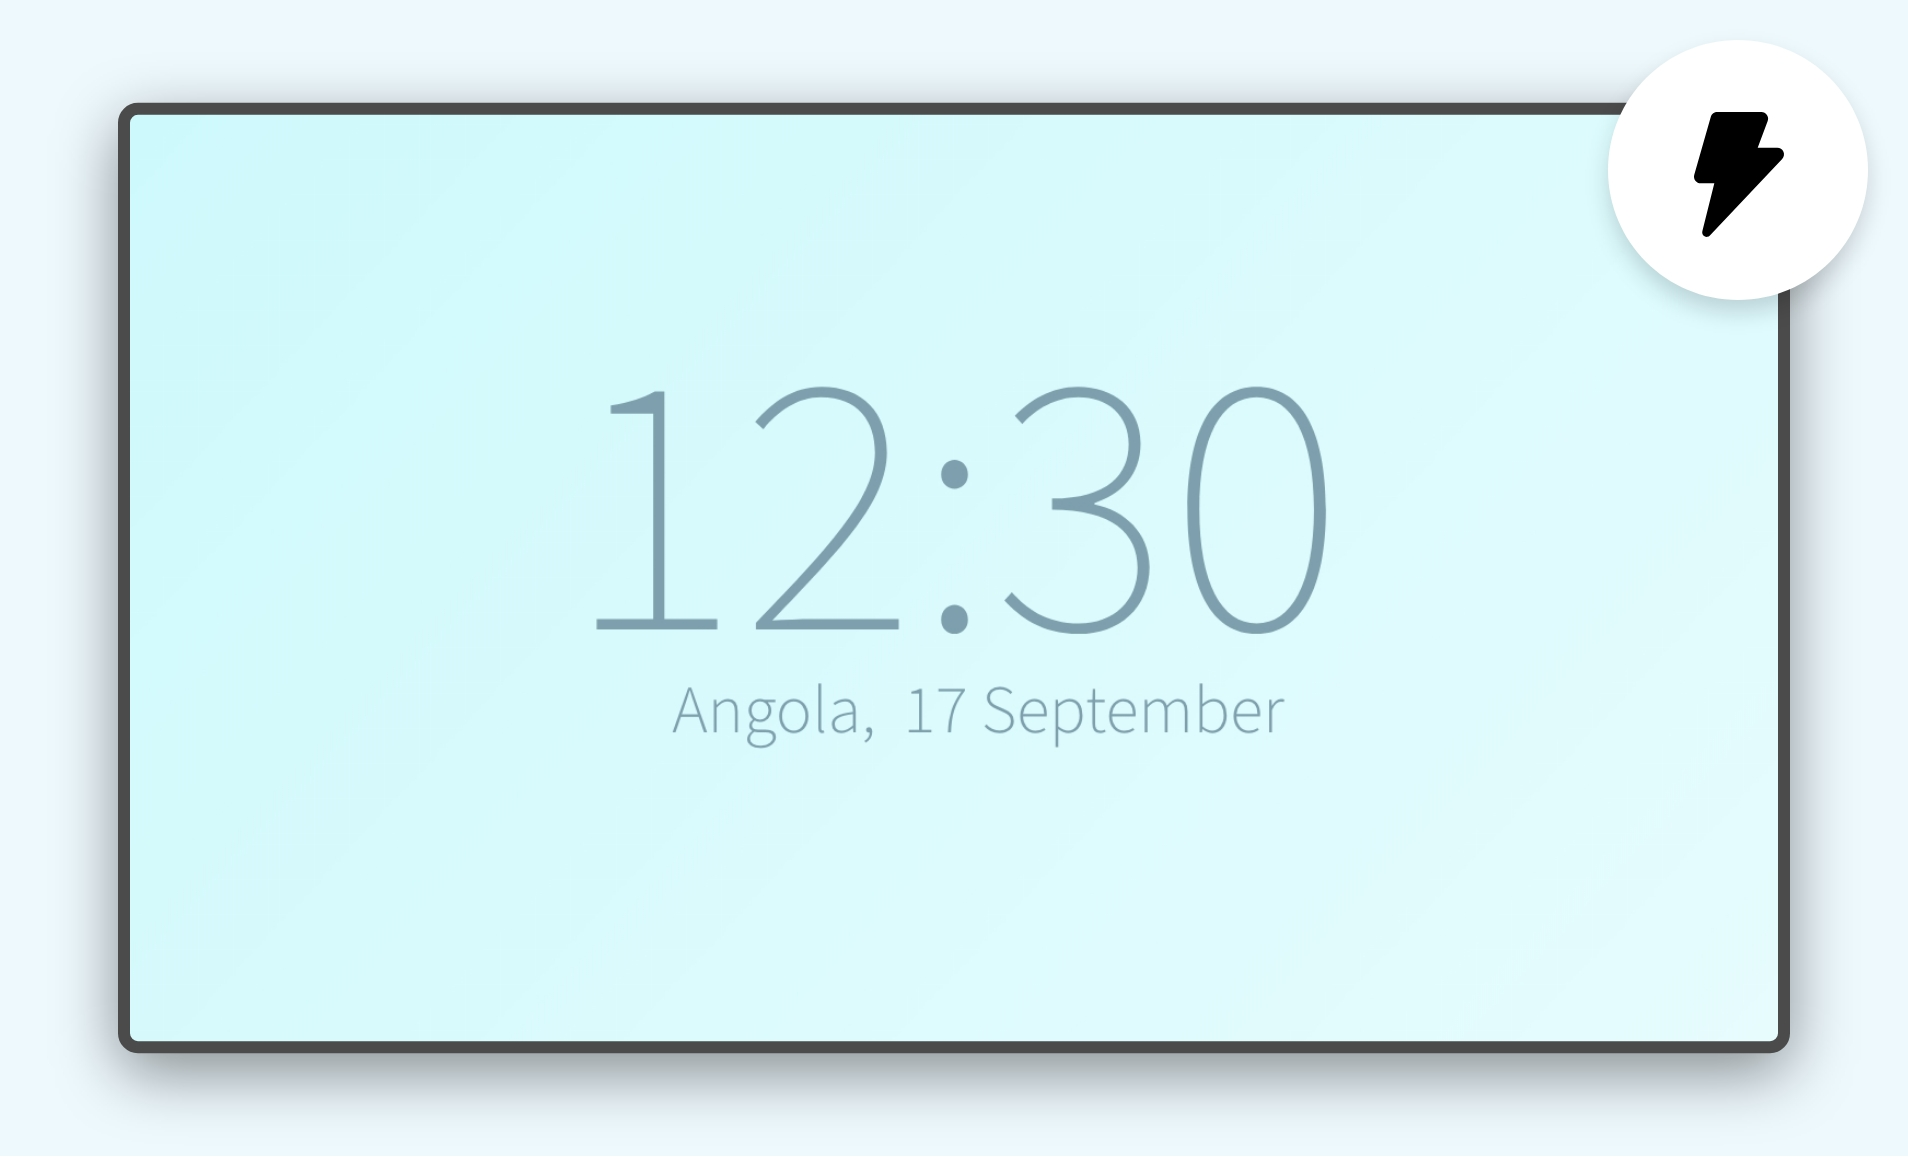 Clock app edit screen to preview quick changes in background color or text color or timezones or country.